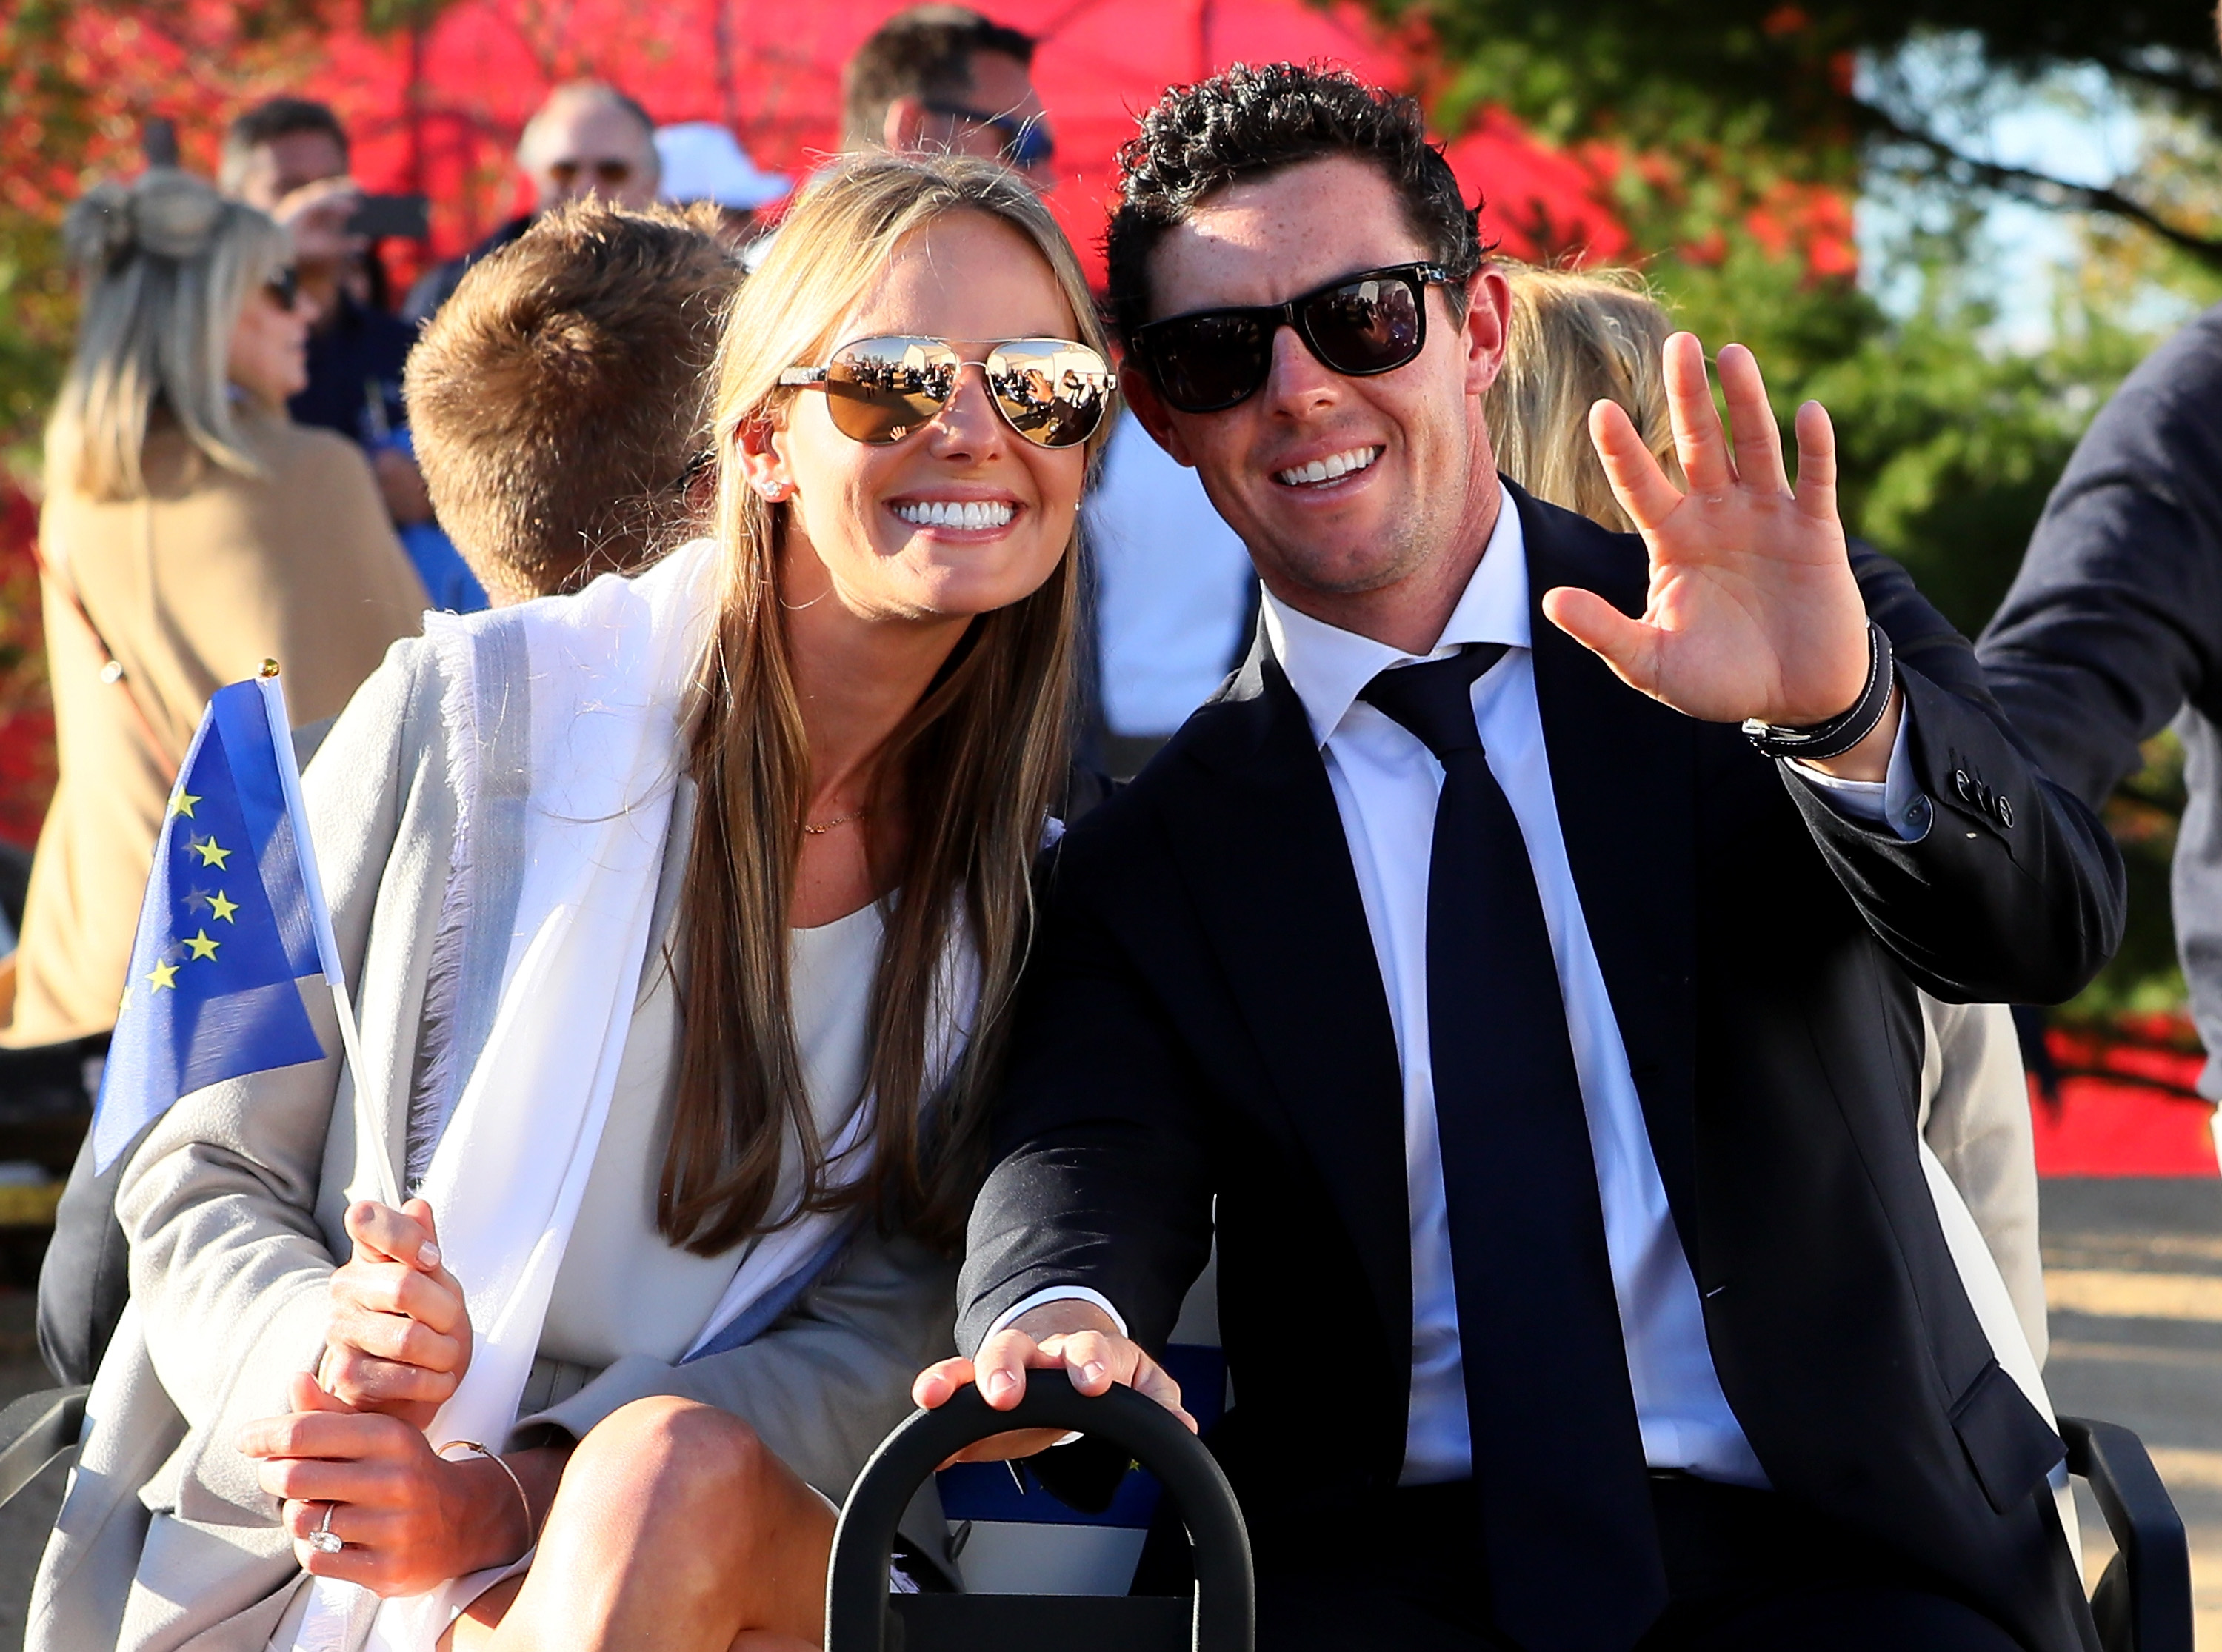 Erica Stoll and Rory McIlroy attend the 2016 Ryder Cup